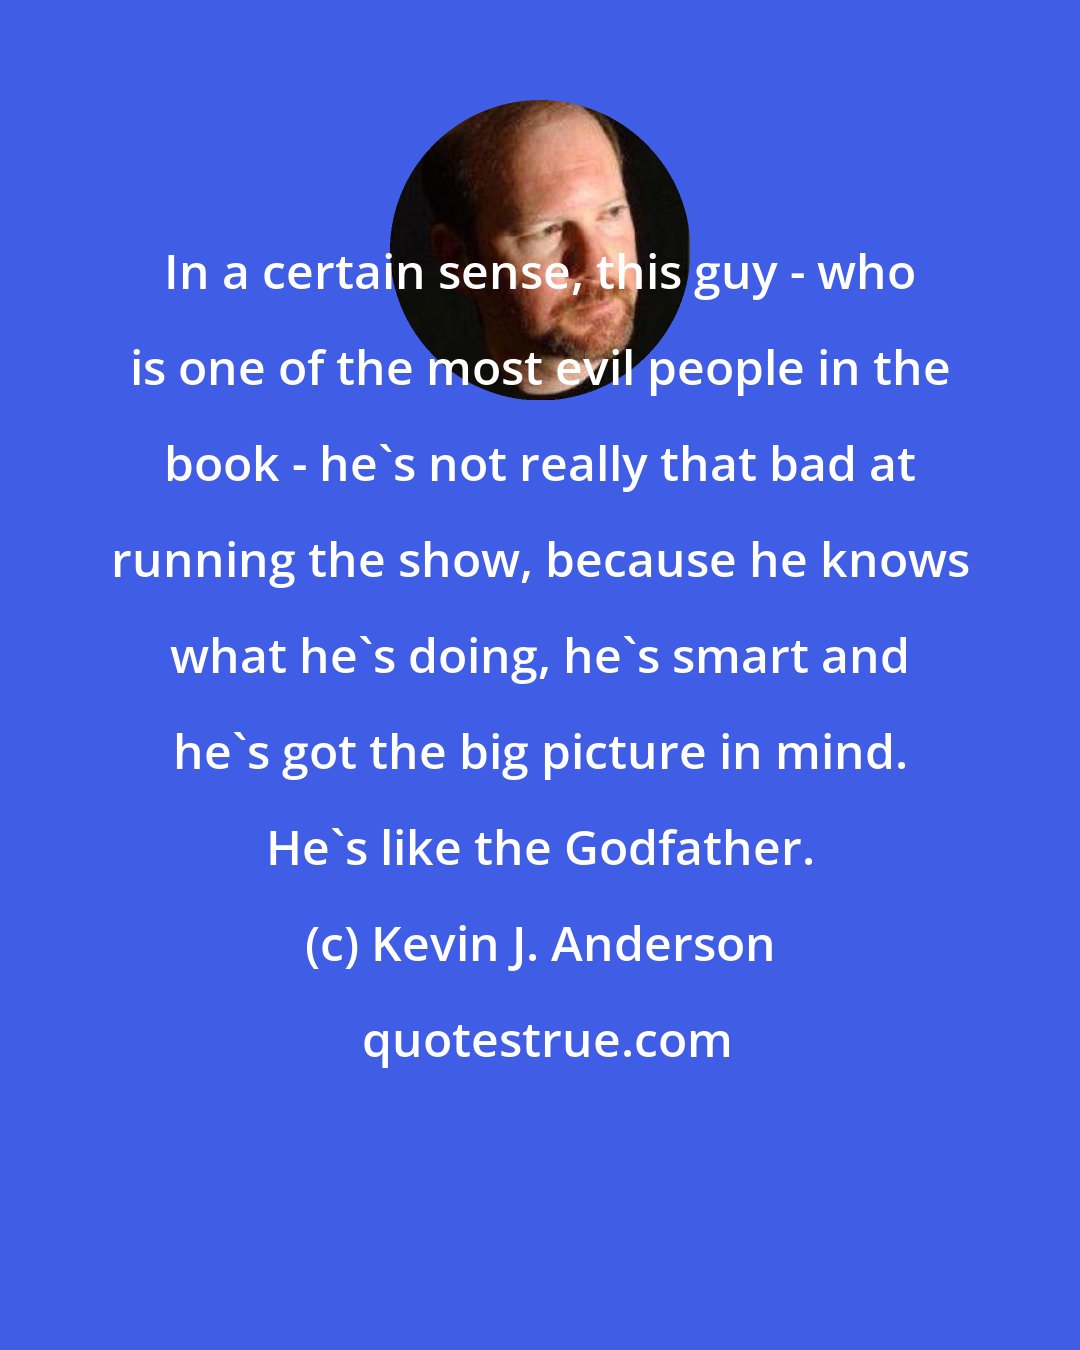 Kevin J. Anderson: In a certain sense, this guy - who is one of the most evil people in the book - he's not really that bad at running the show, because he knows what he's doing, he's smart and he's got the big picture in mind. He's like the Godfather.